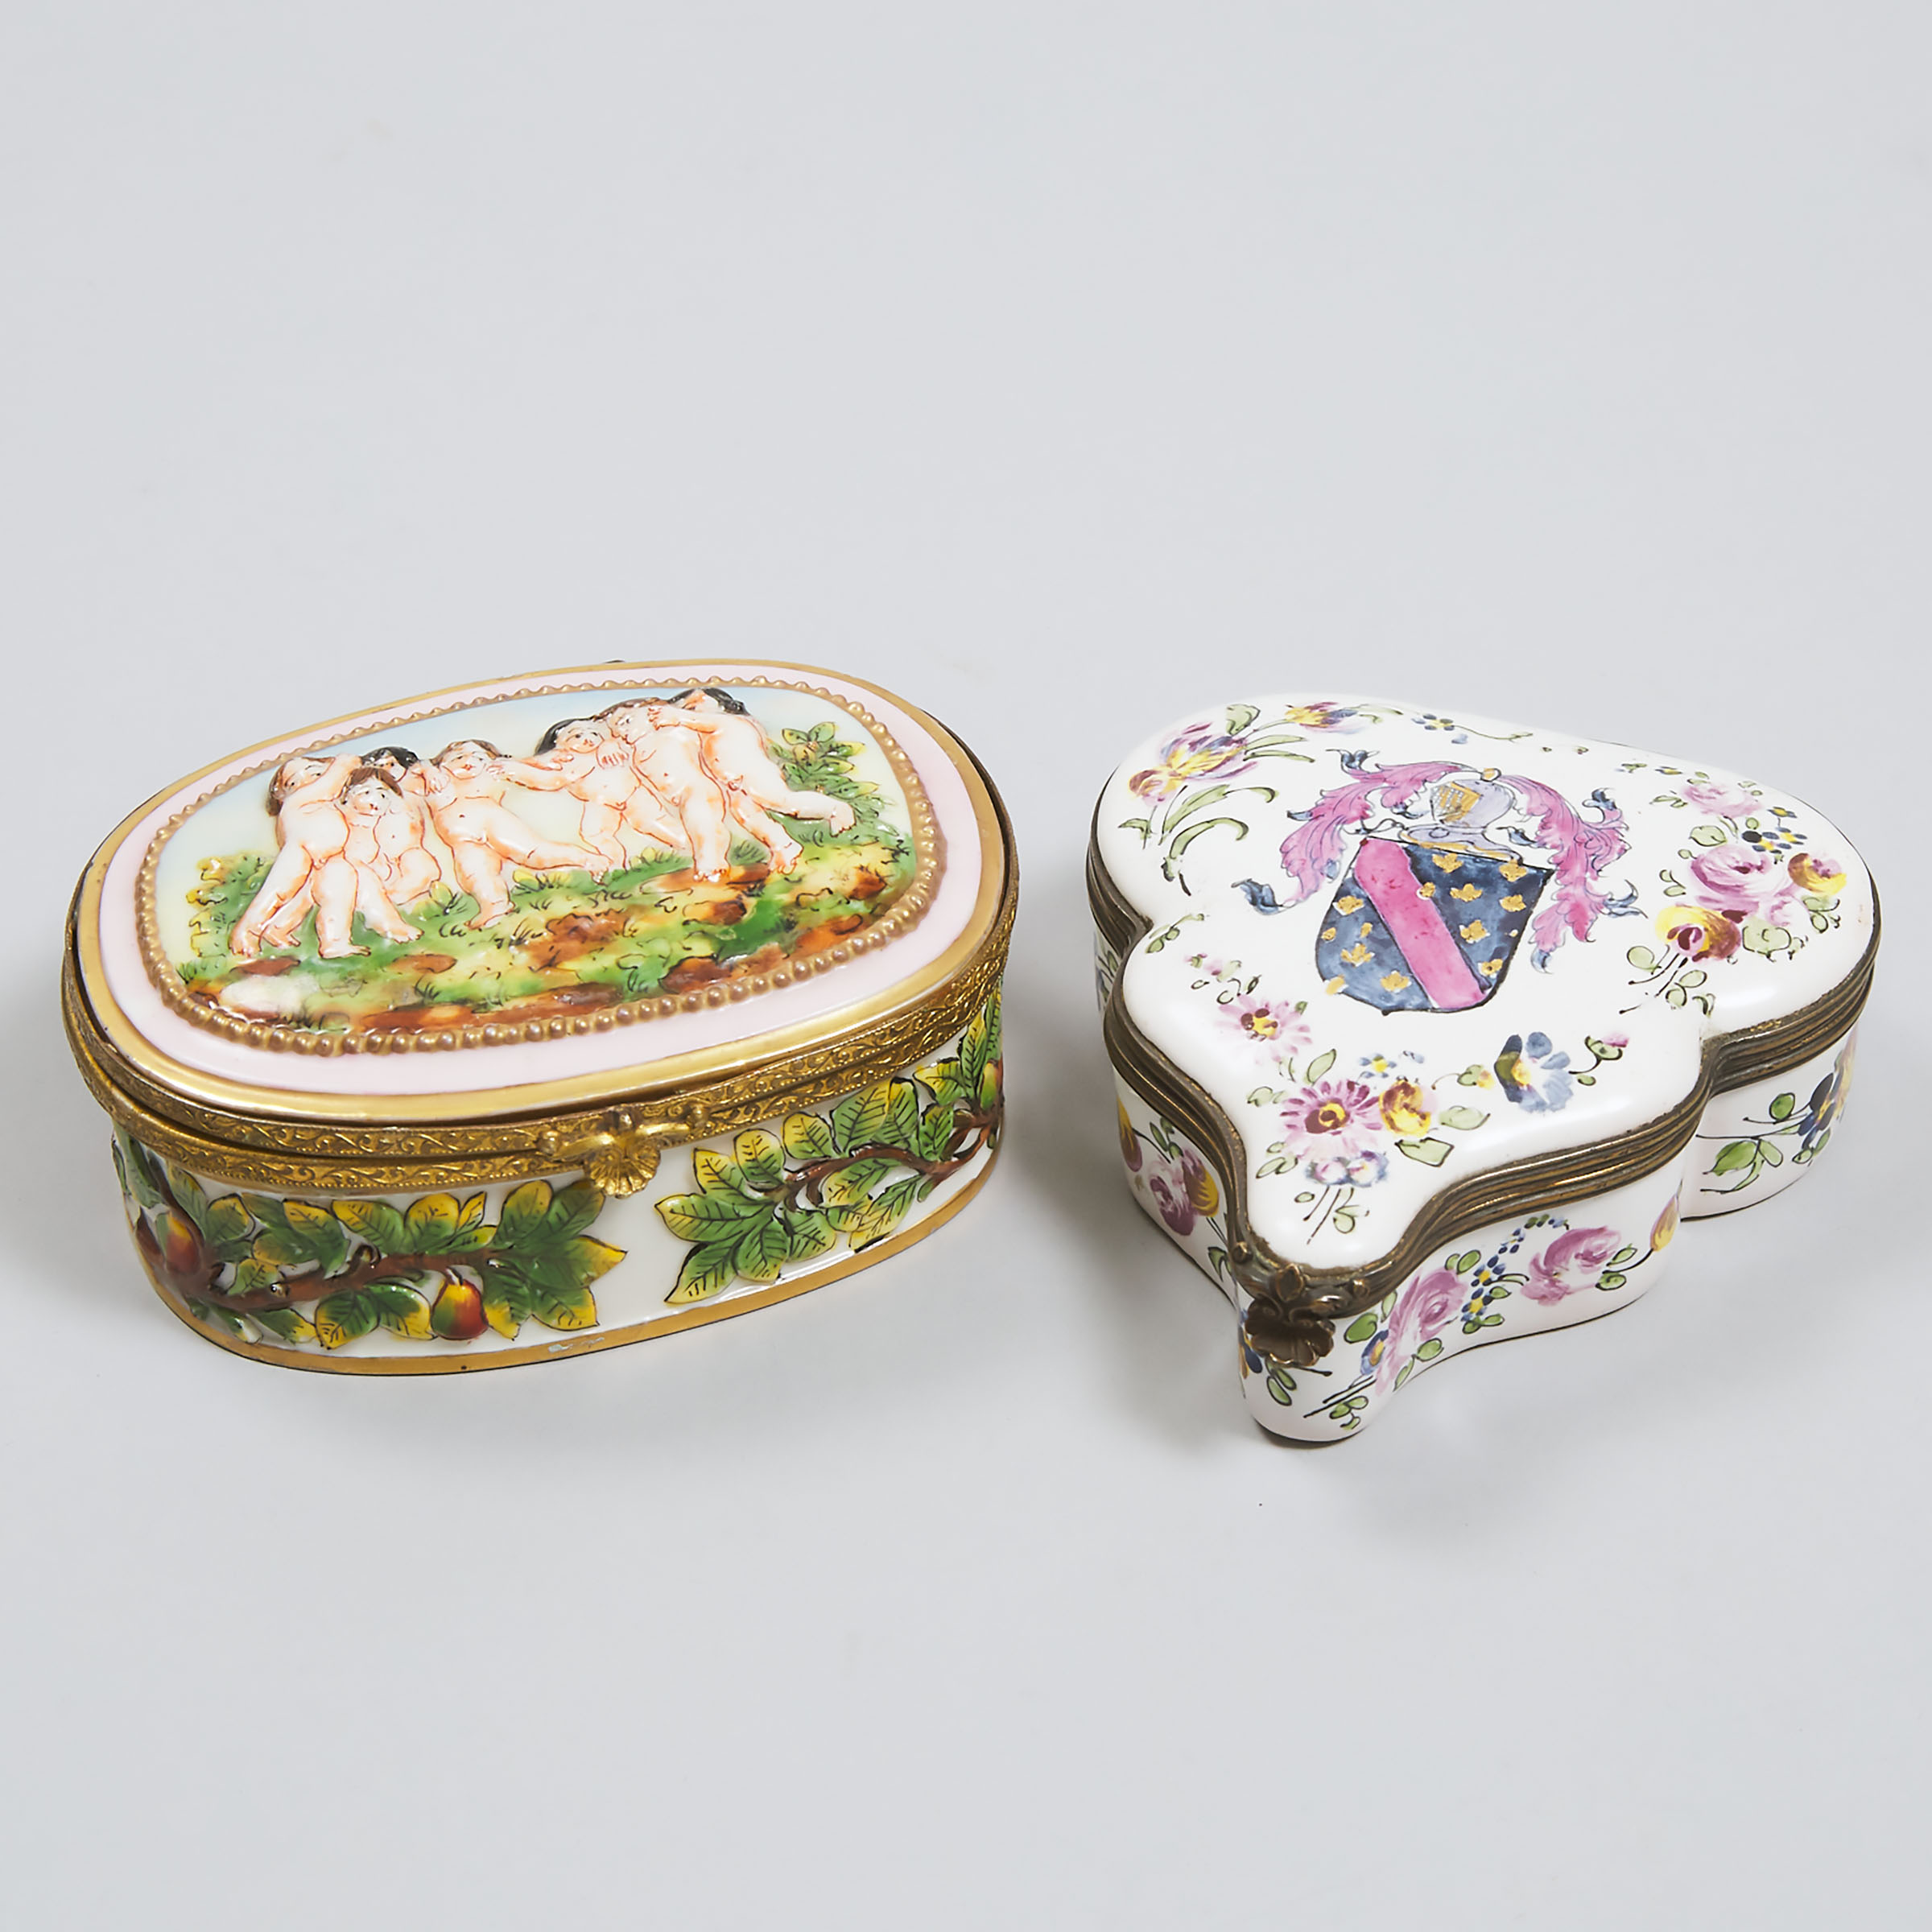 Two Continental Dresser Boxes, early 20th century